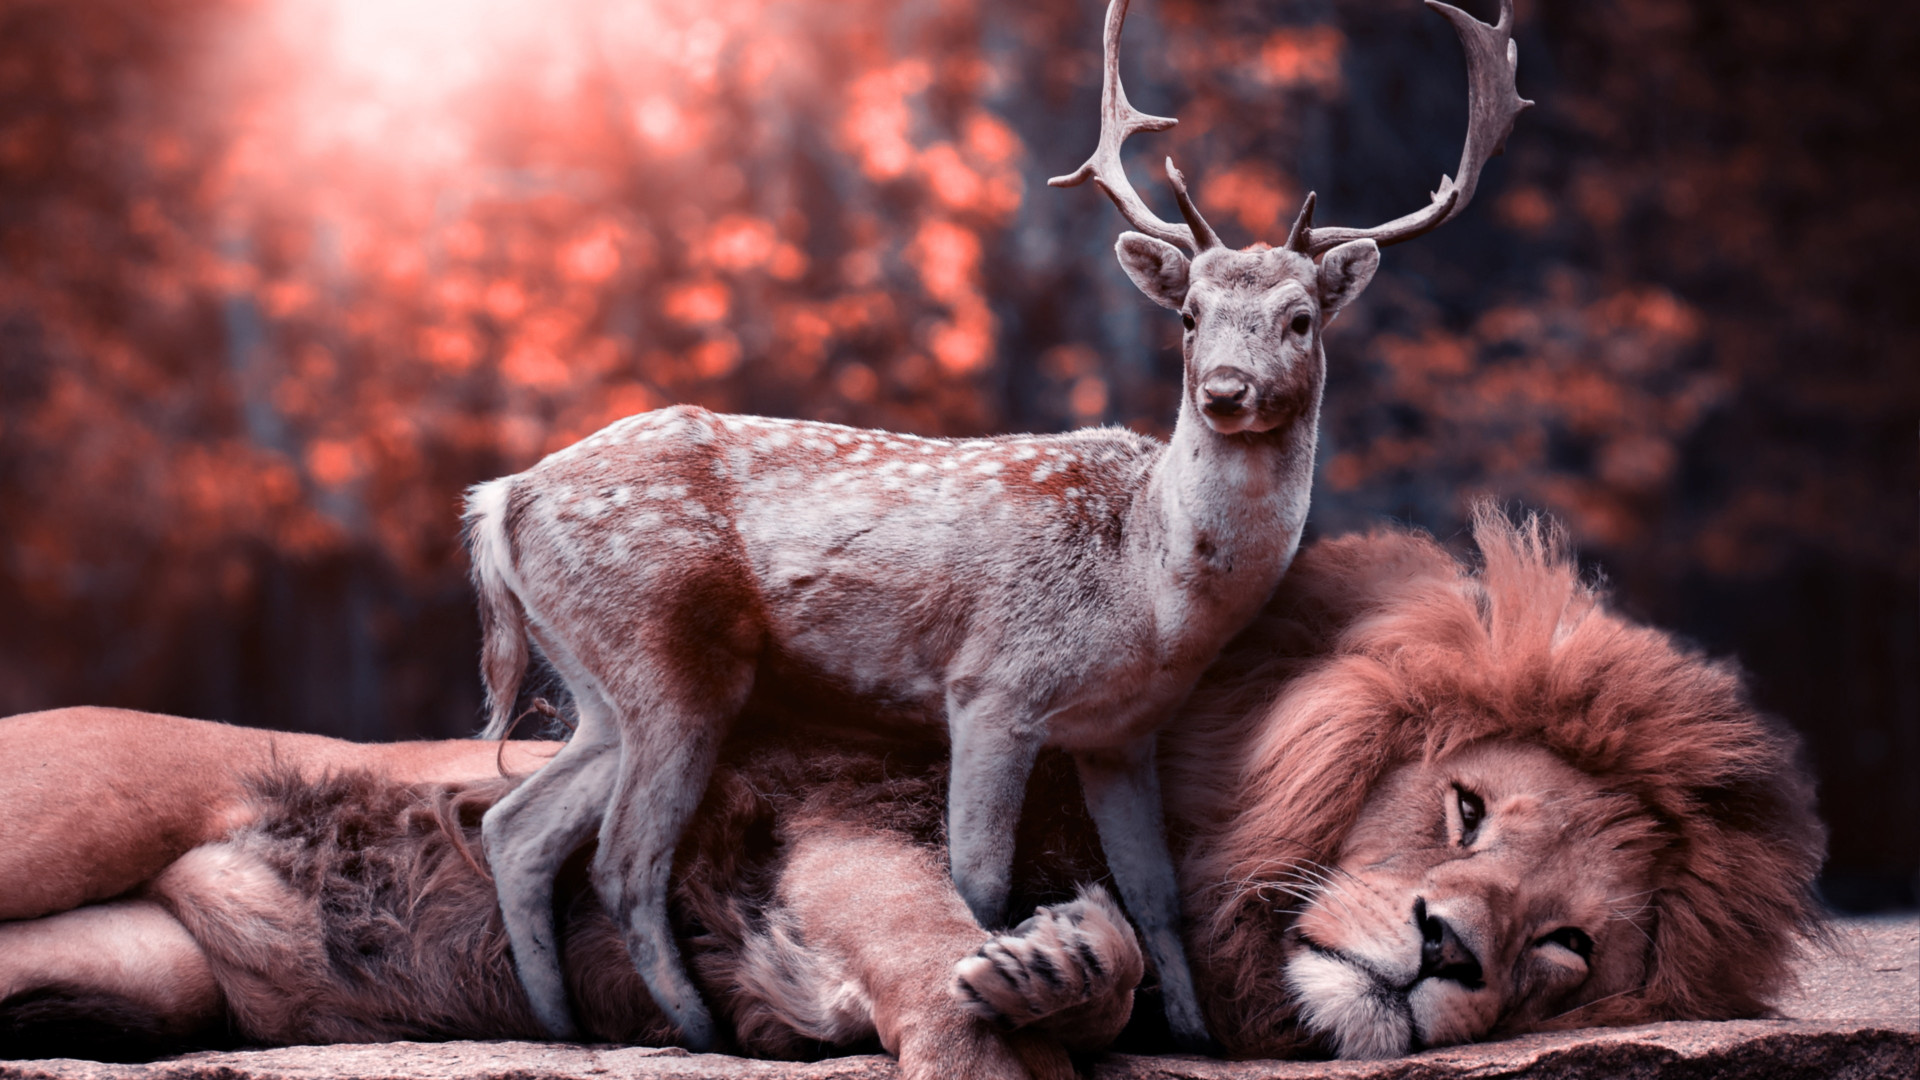 The lion and the deer wallpaper 1920x1080